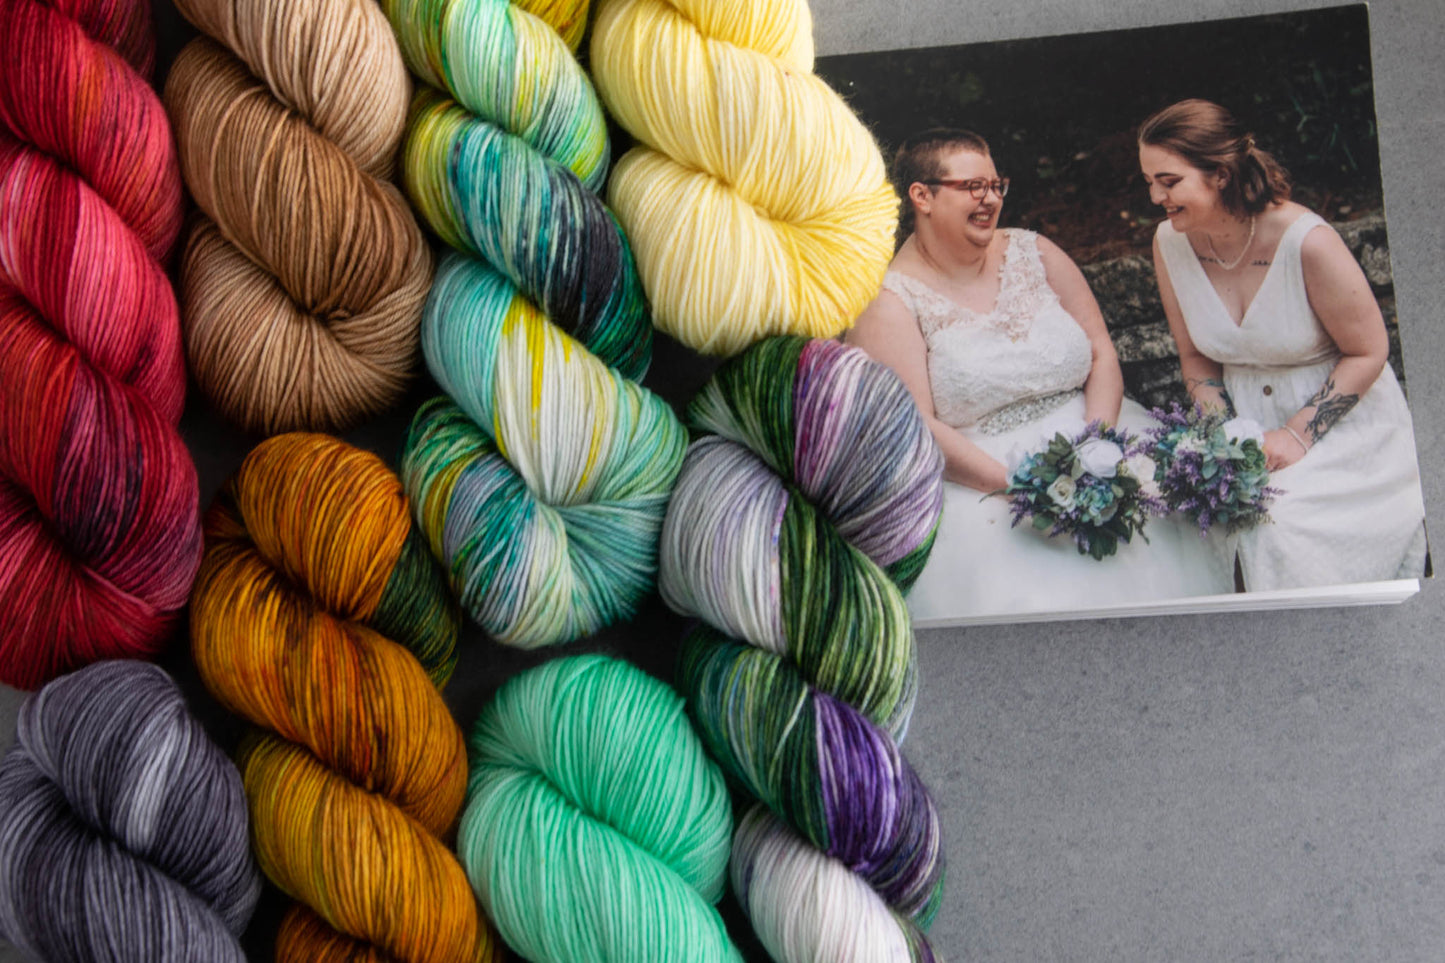 All eight skeins in the collection including red, brown, teal, yellow, purple, aqua, orange, and gray, next to a wedding photo of Cat and Penny.